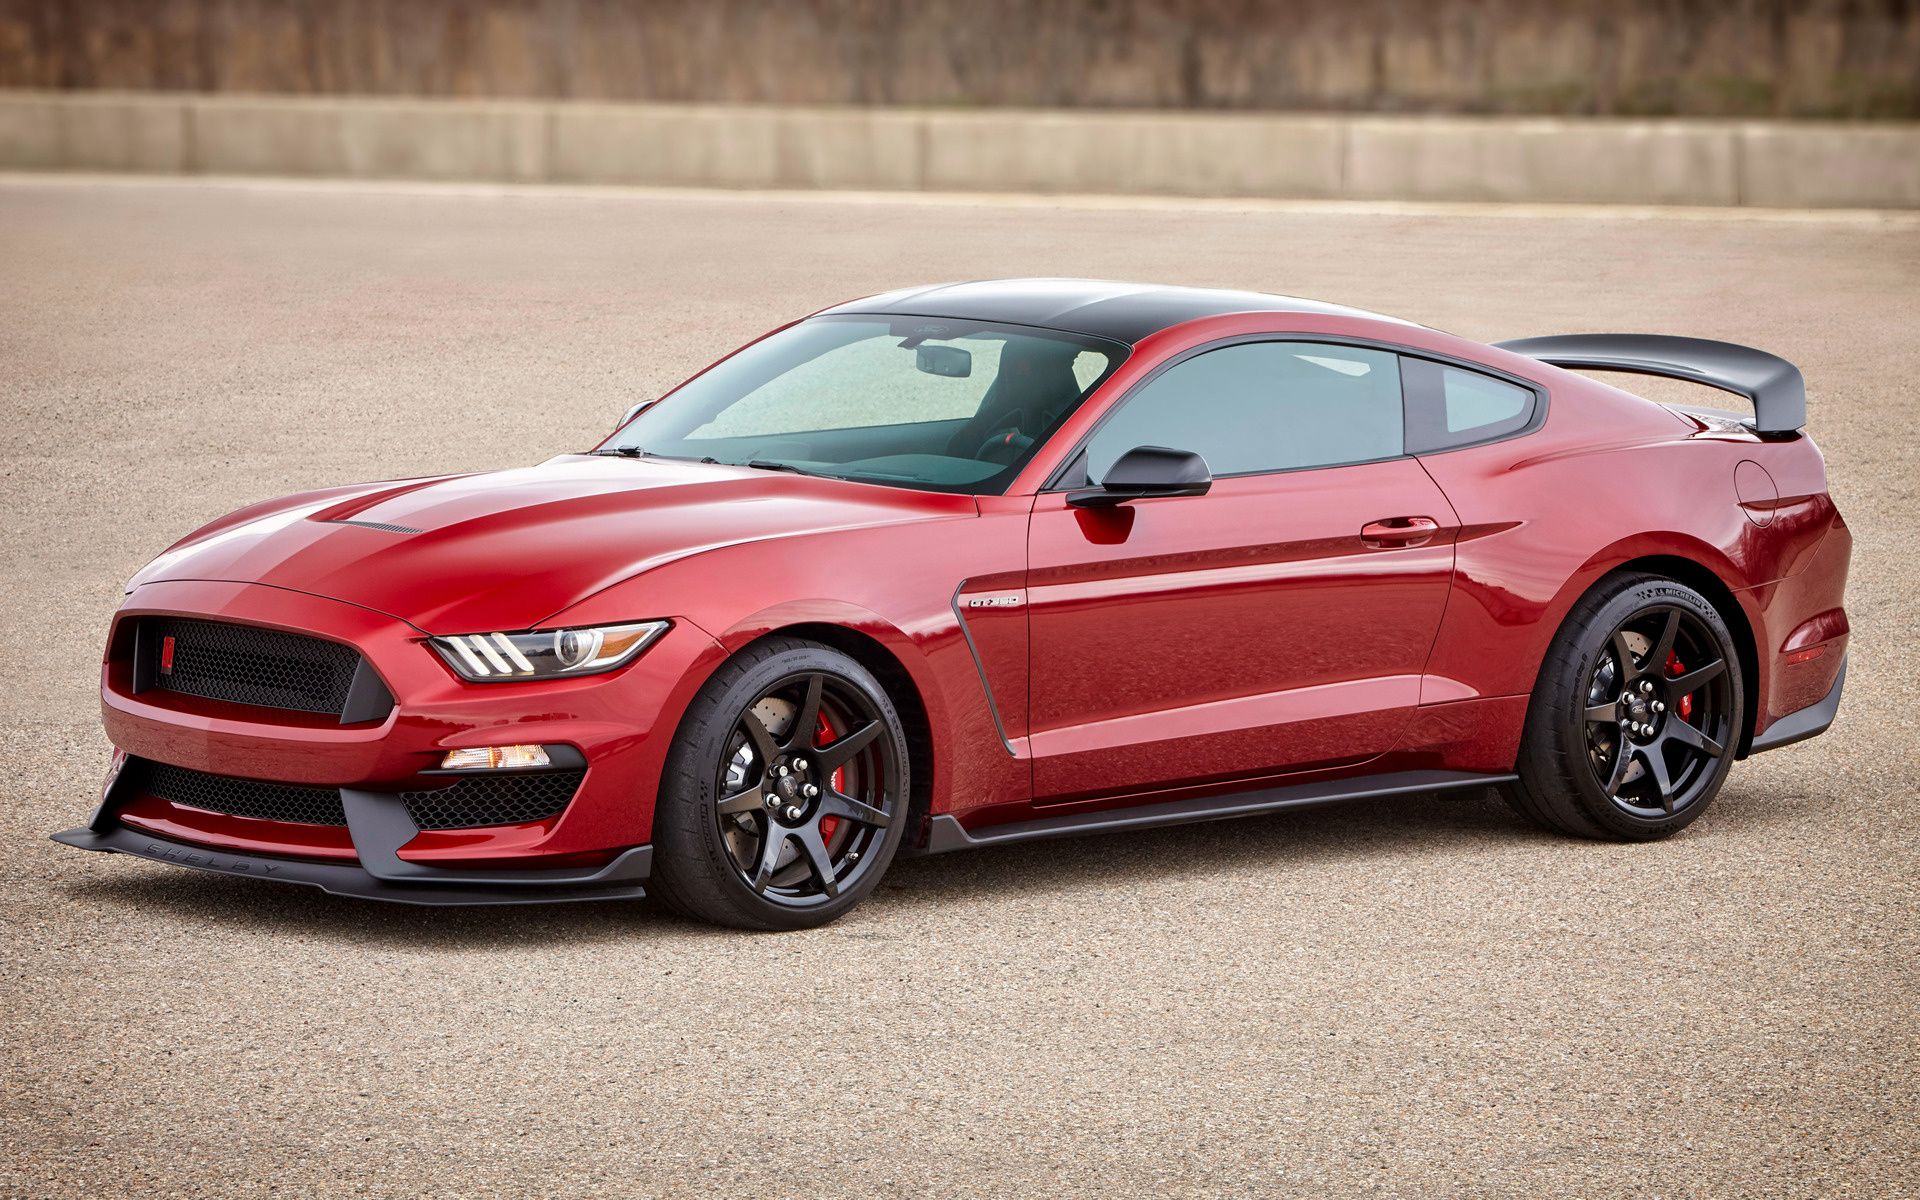 Shelby GT350R Mustang and HD Image